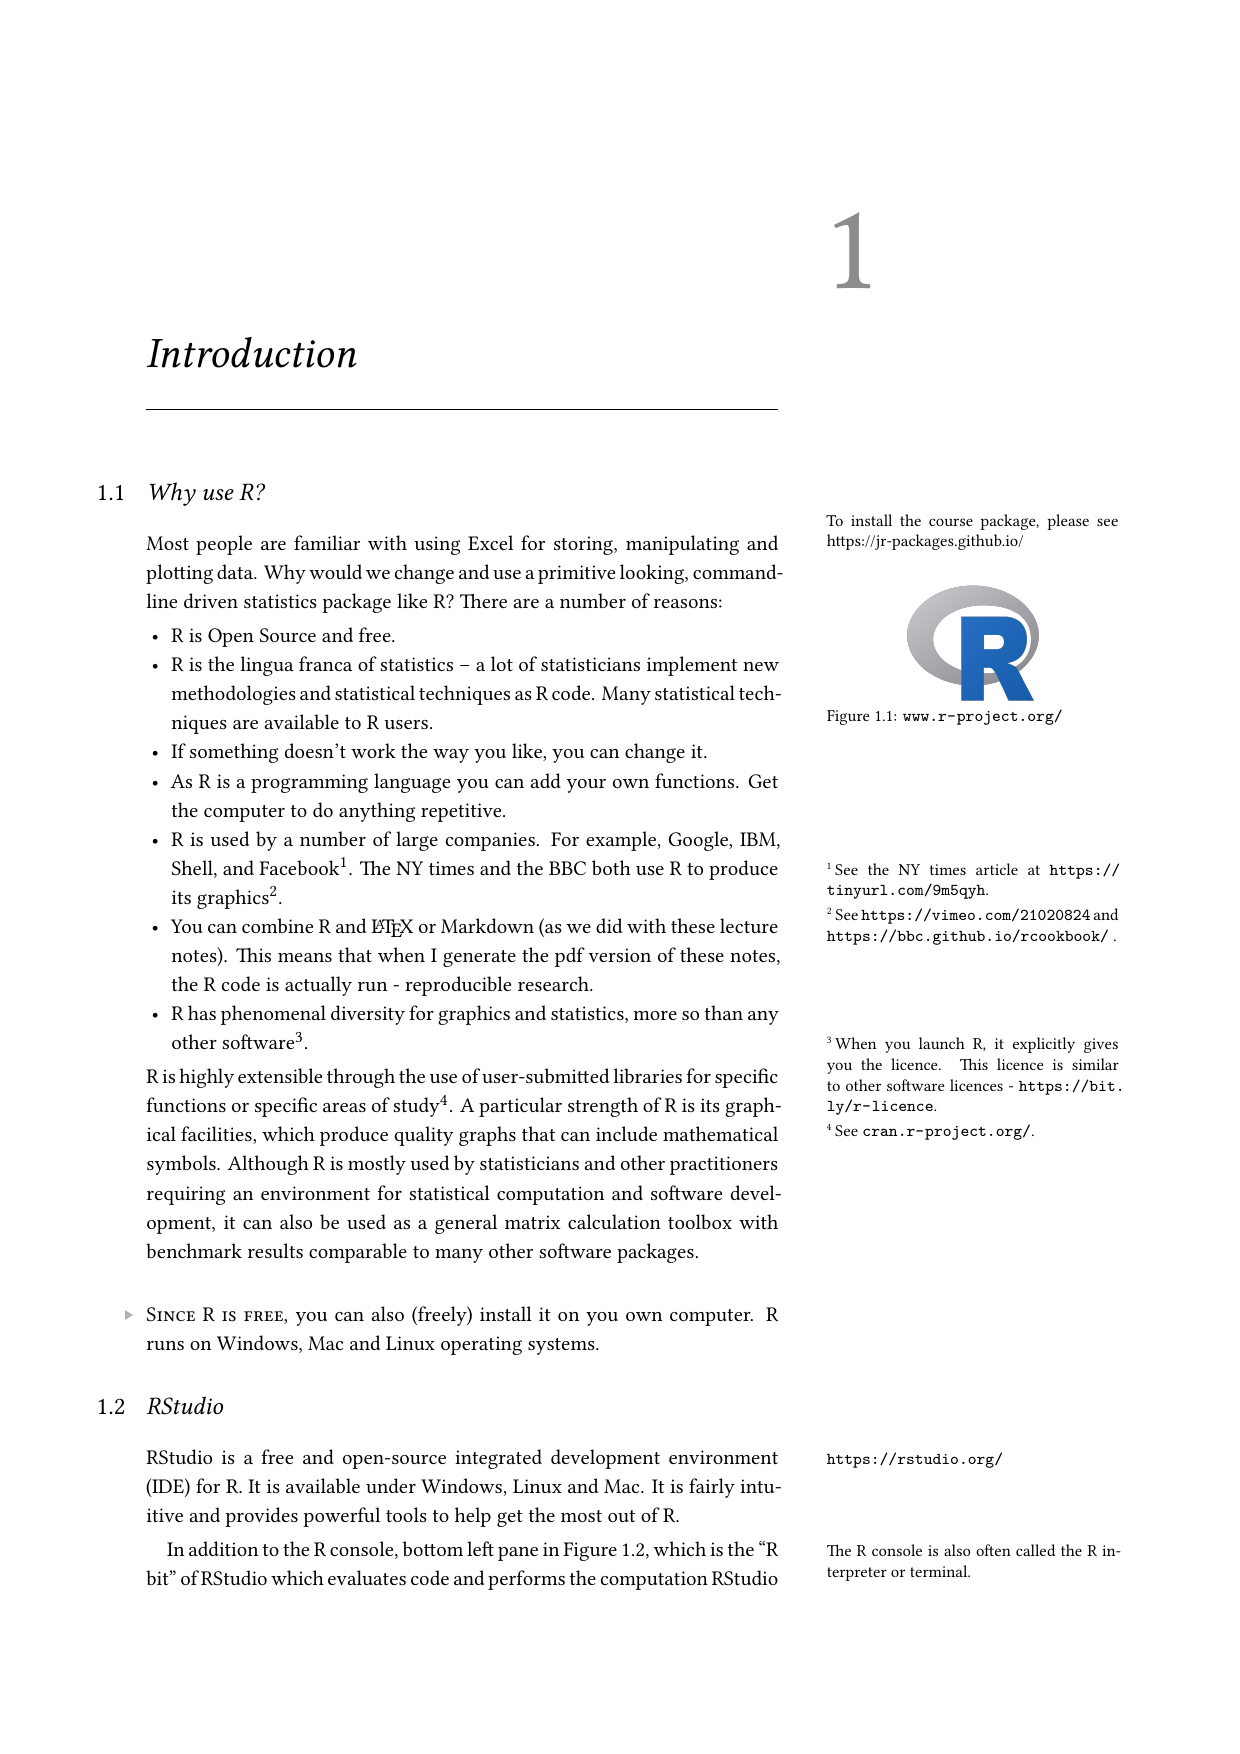 Page 2 of example course material for Introduction to R